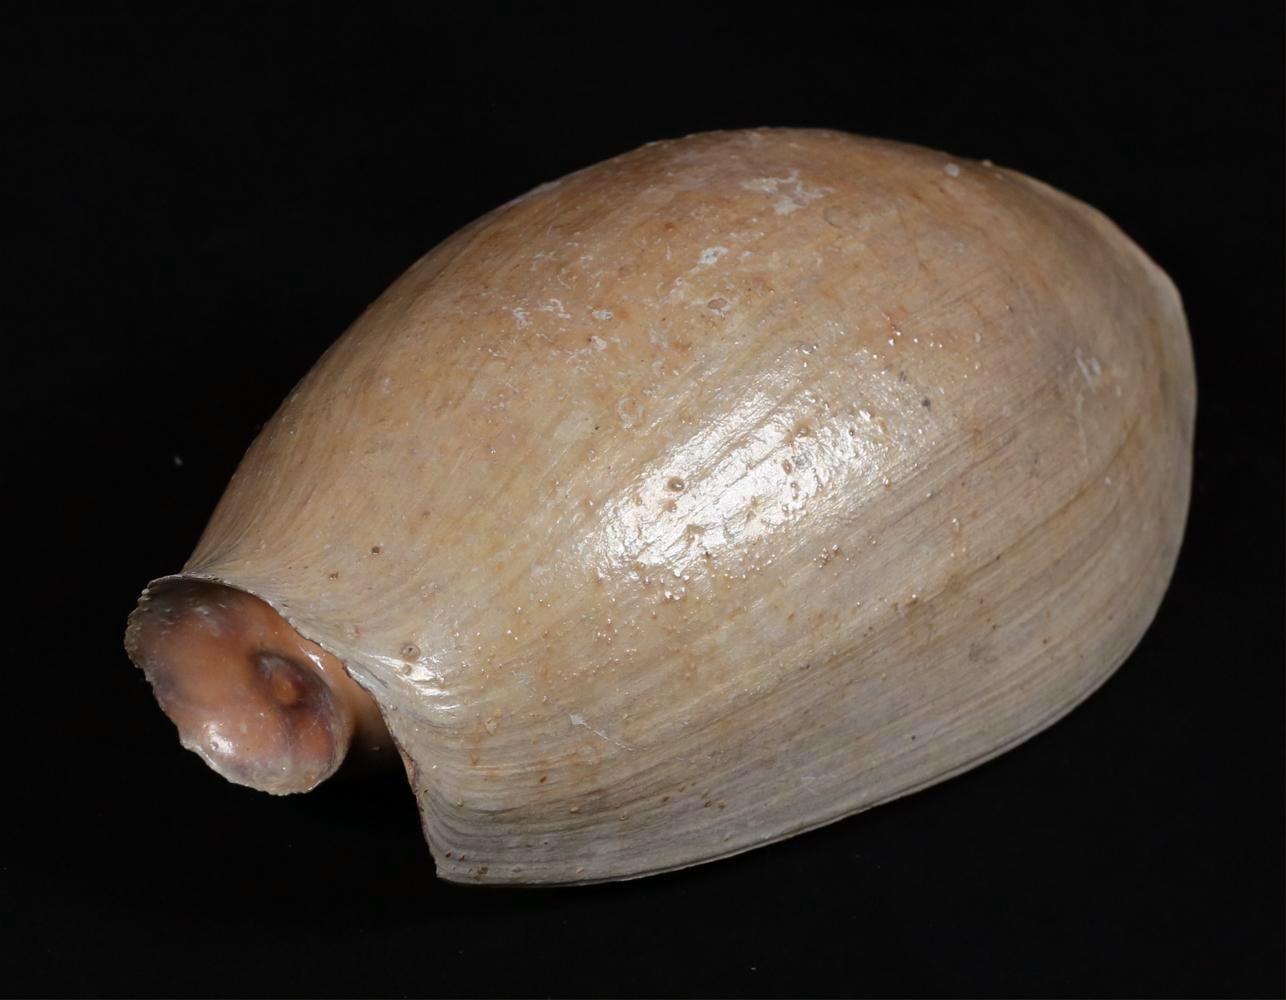 A large Elephant's Snout Volute shell - Cymbium glans gamelan

Approximate size: 12 (l) x 5.5 (w) x 4 (h) in.

The Elephant’s Snout Volute shell is a species of sea snail belonging to the Volutidae family. This particular example is uncommon for its